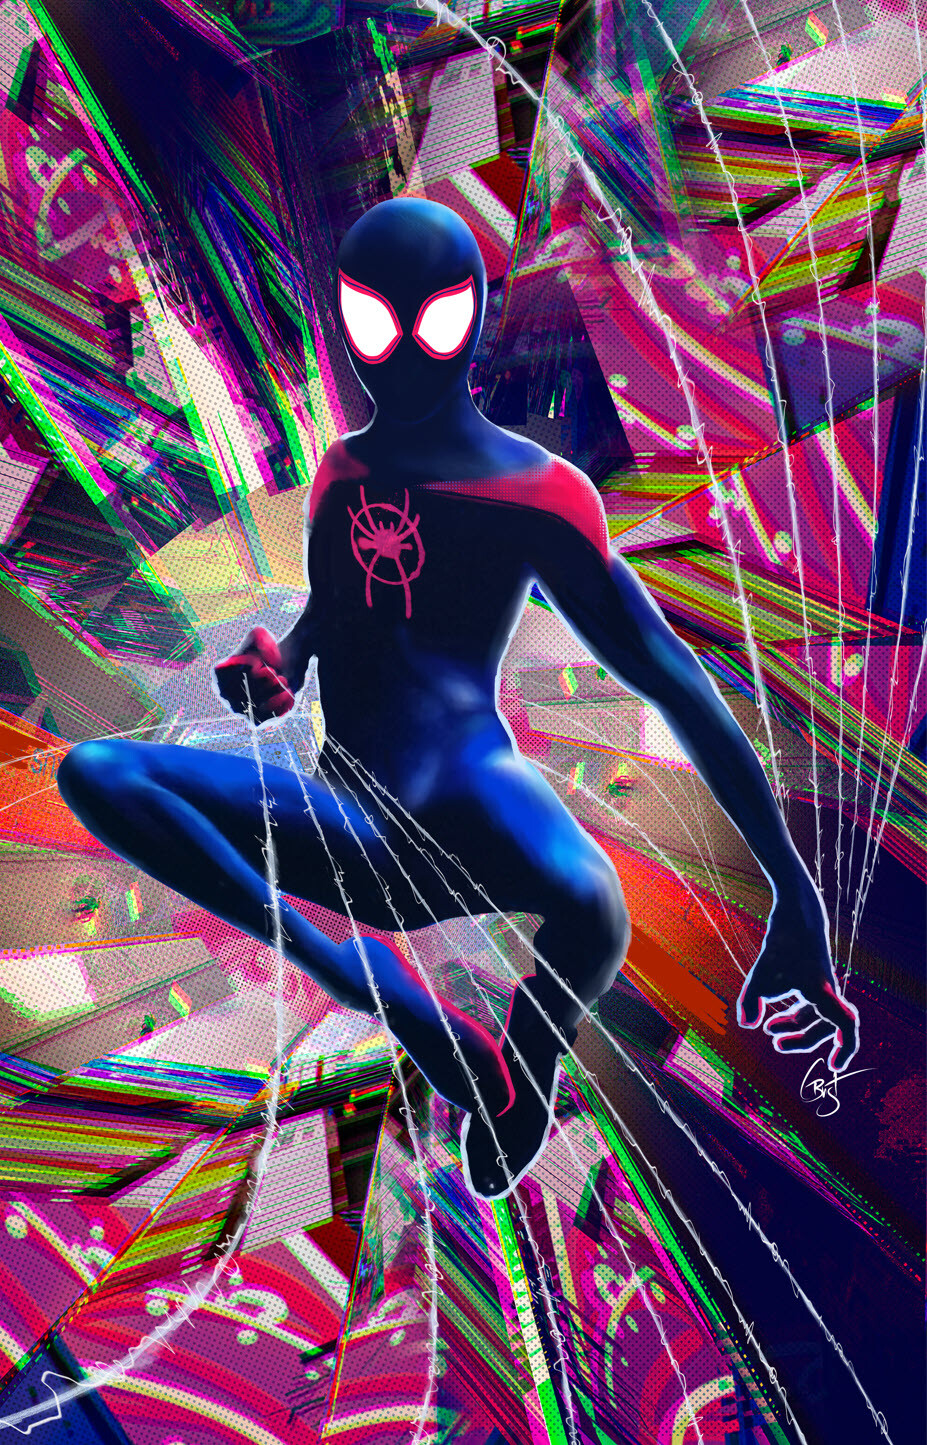 SPIDERGLITCH
FAN ART by Christopher Bust